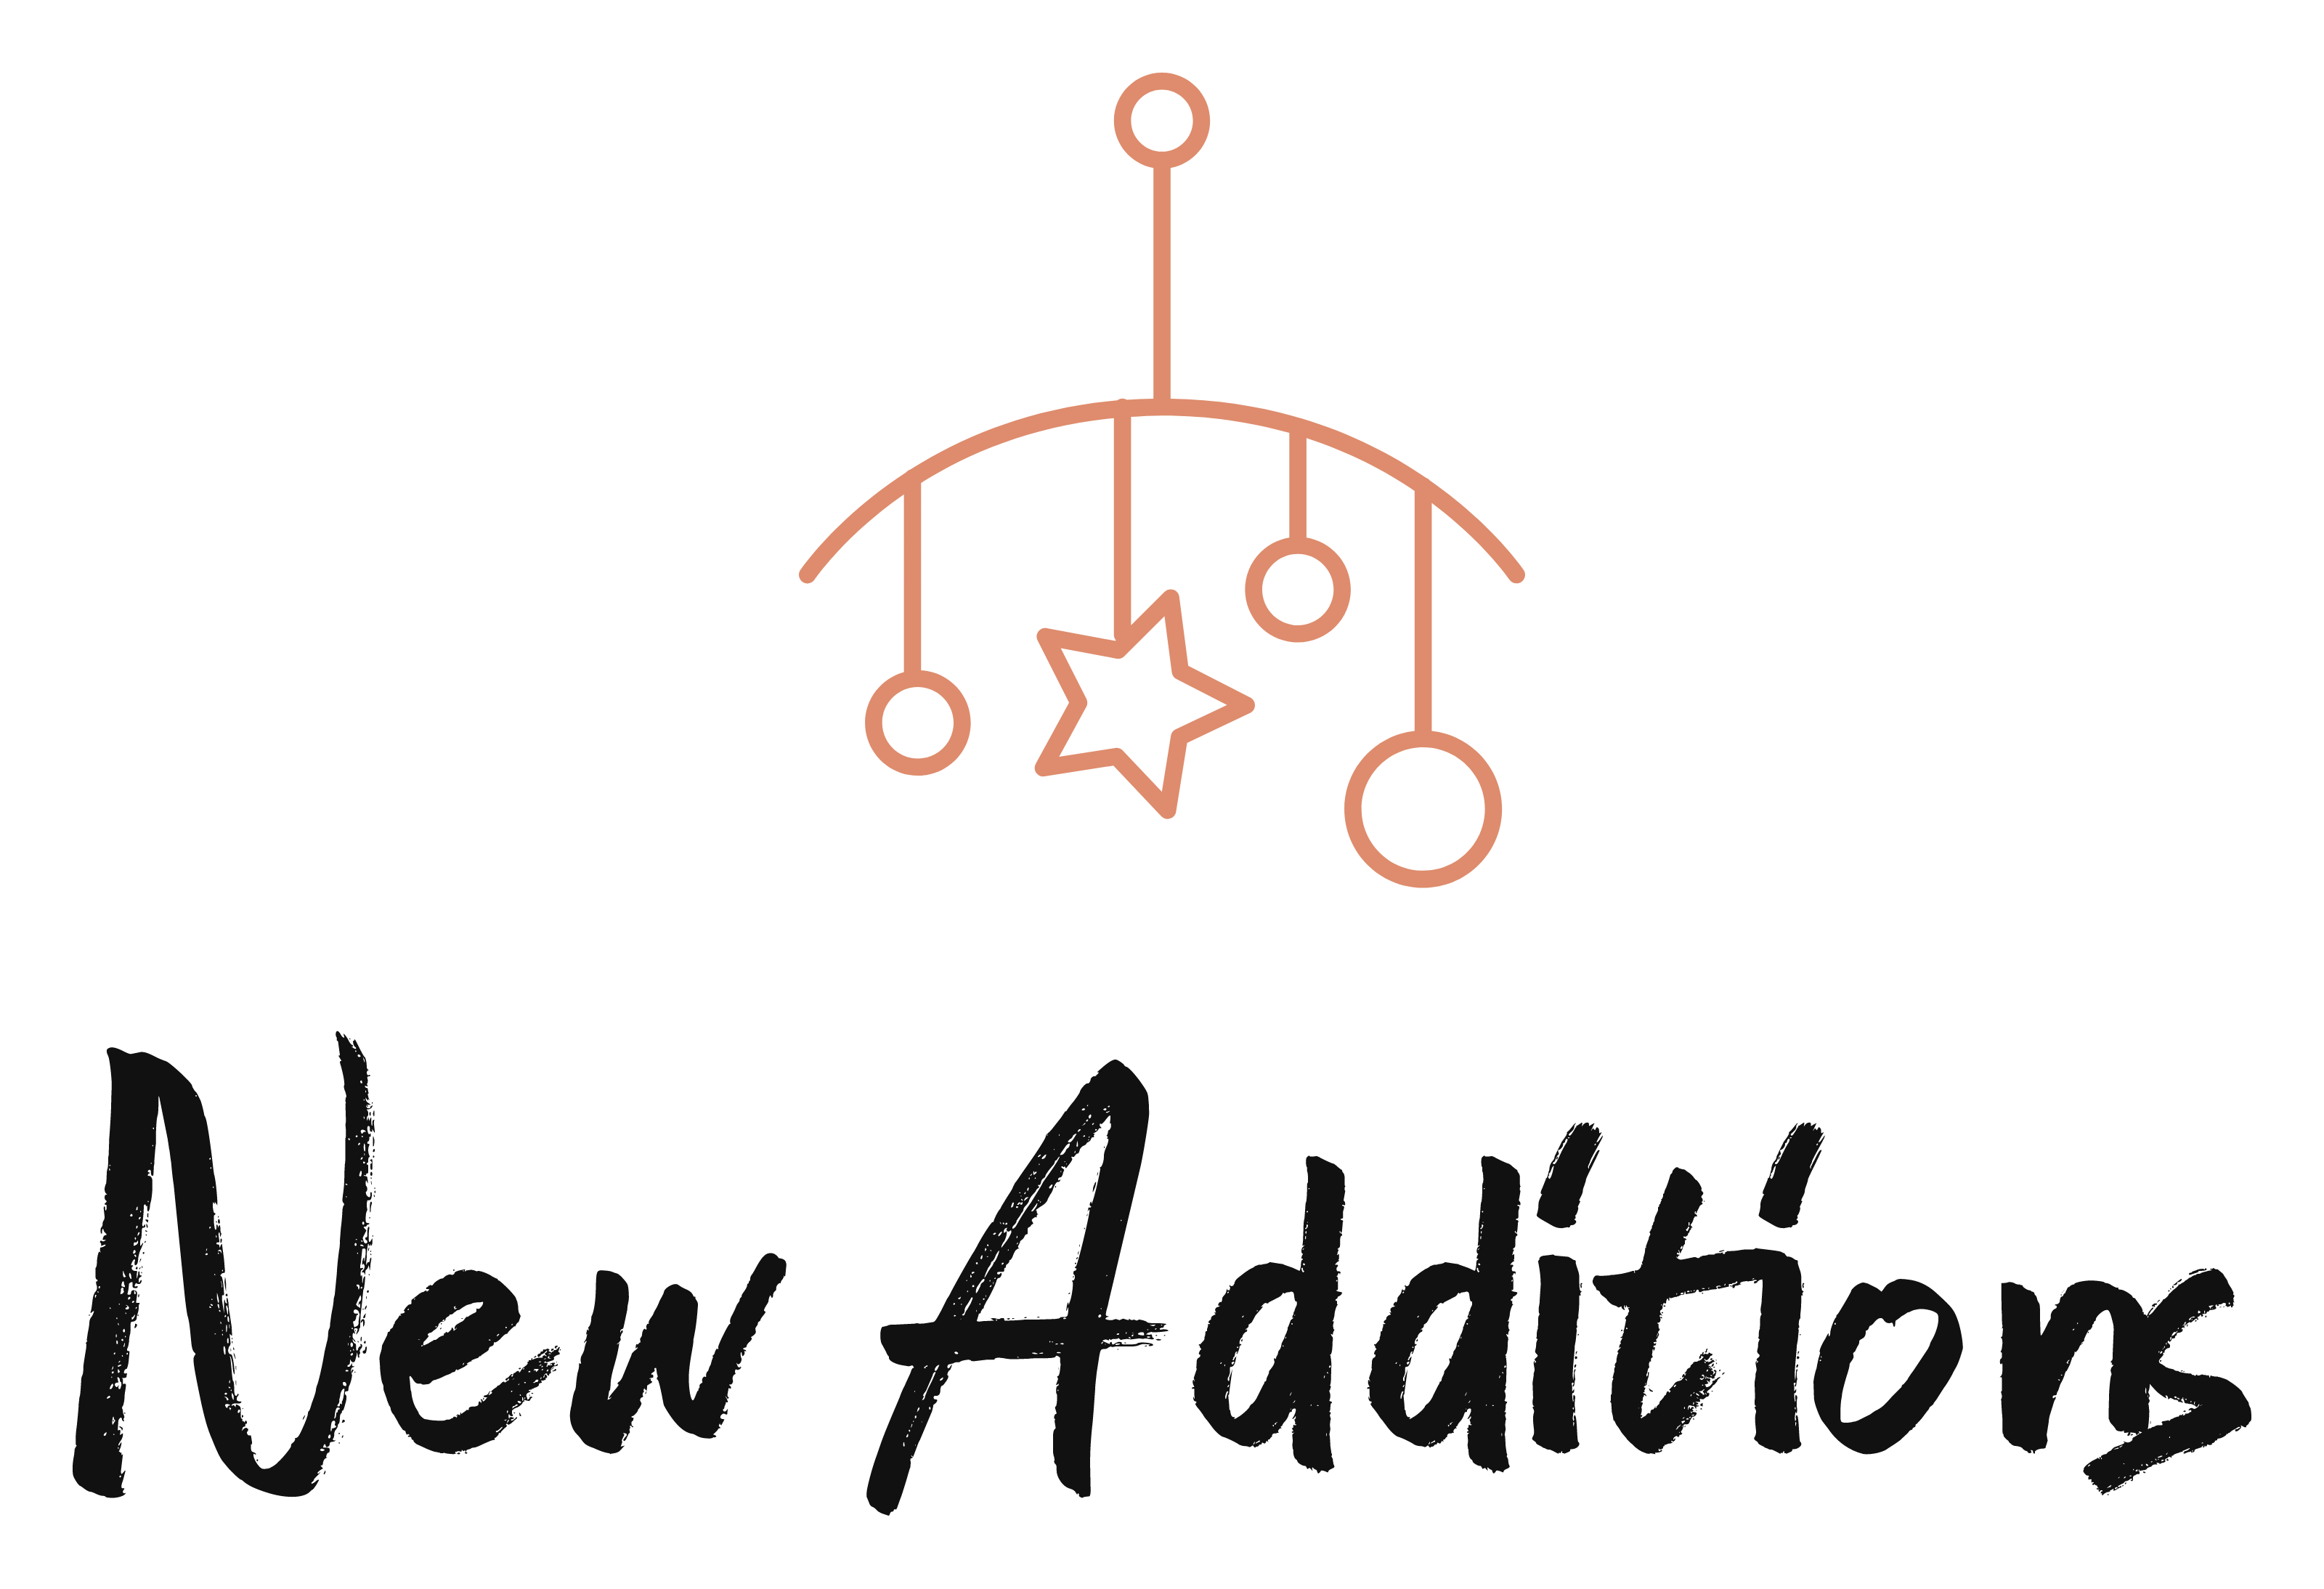 New Additions's logo